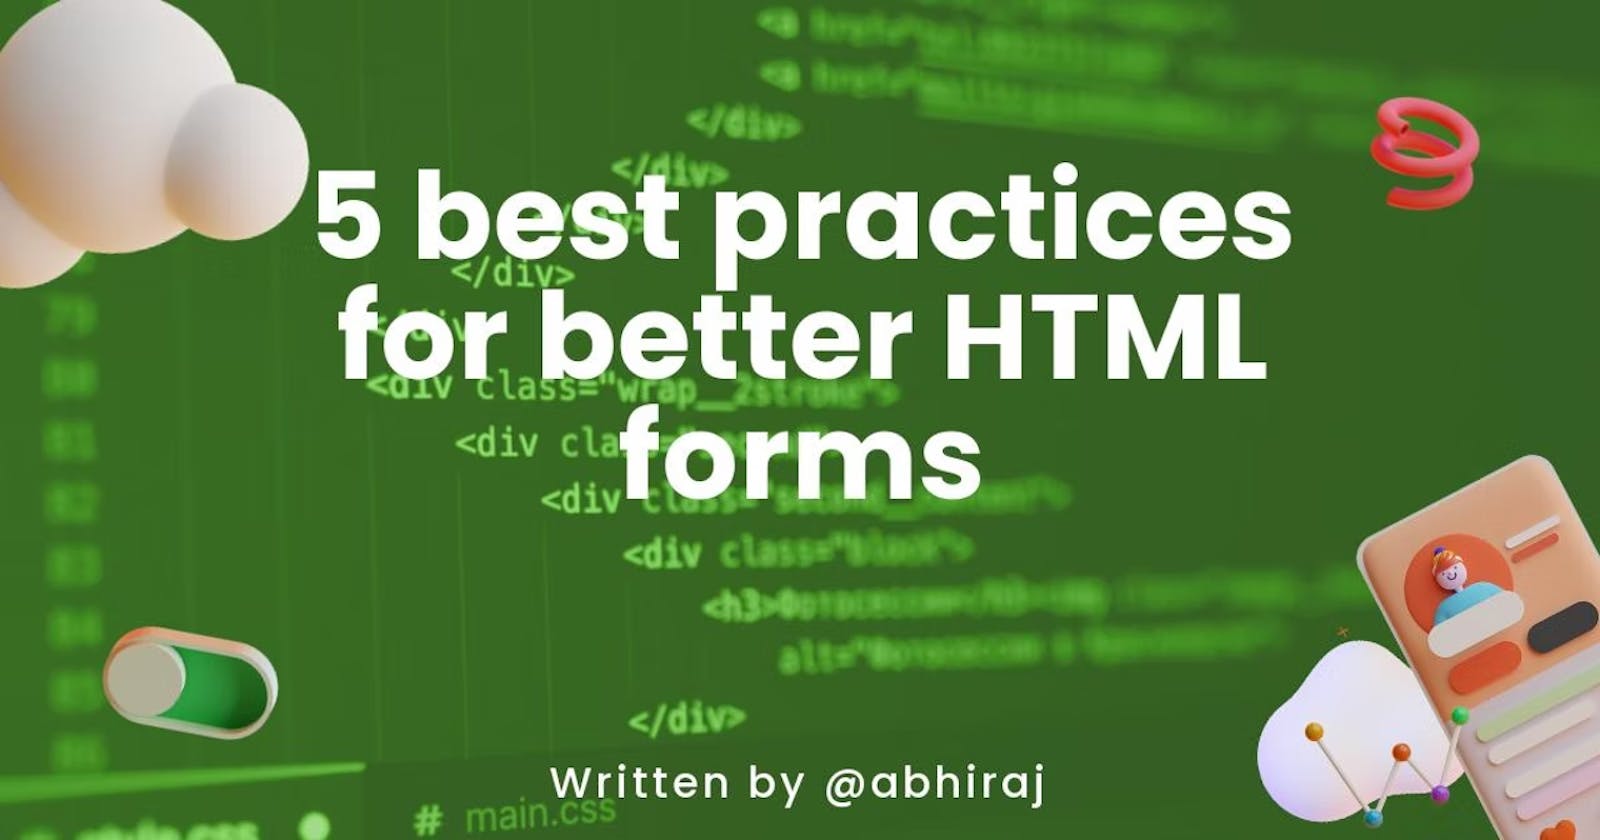 5 best practices for better HTML forms